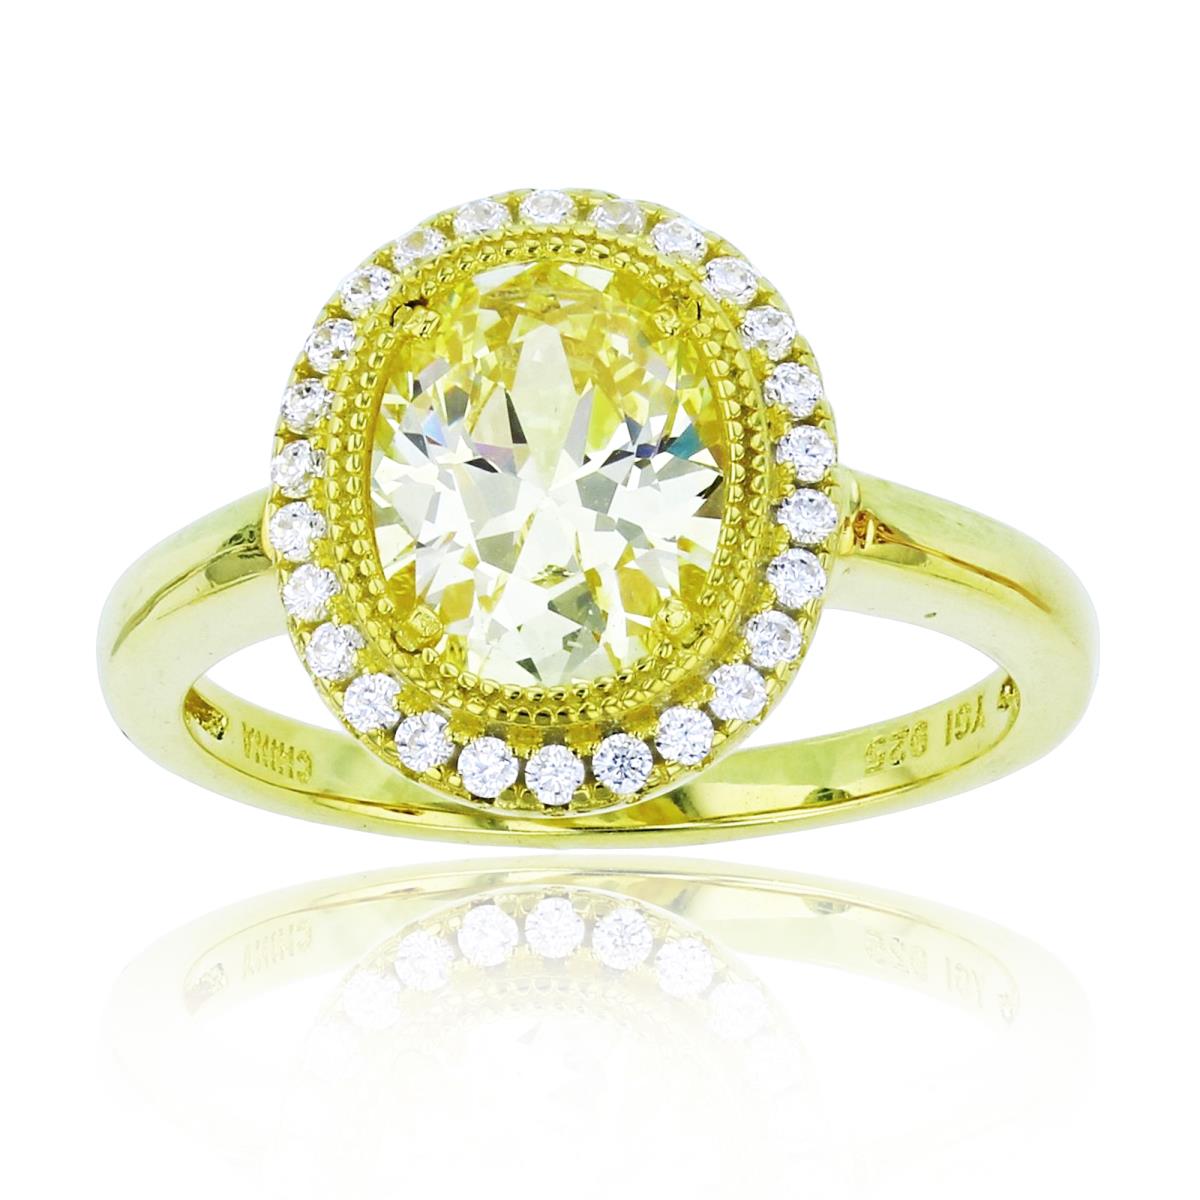 Sterling Silver+1Micron Yellow Gold 9x7mm Ov Canary Yellow CZ & Rnd White CZ Milgrain Bezel Halo Ring